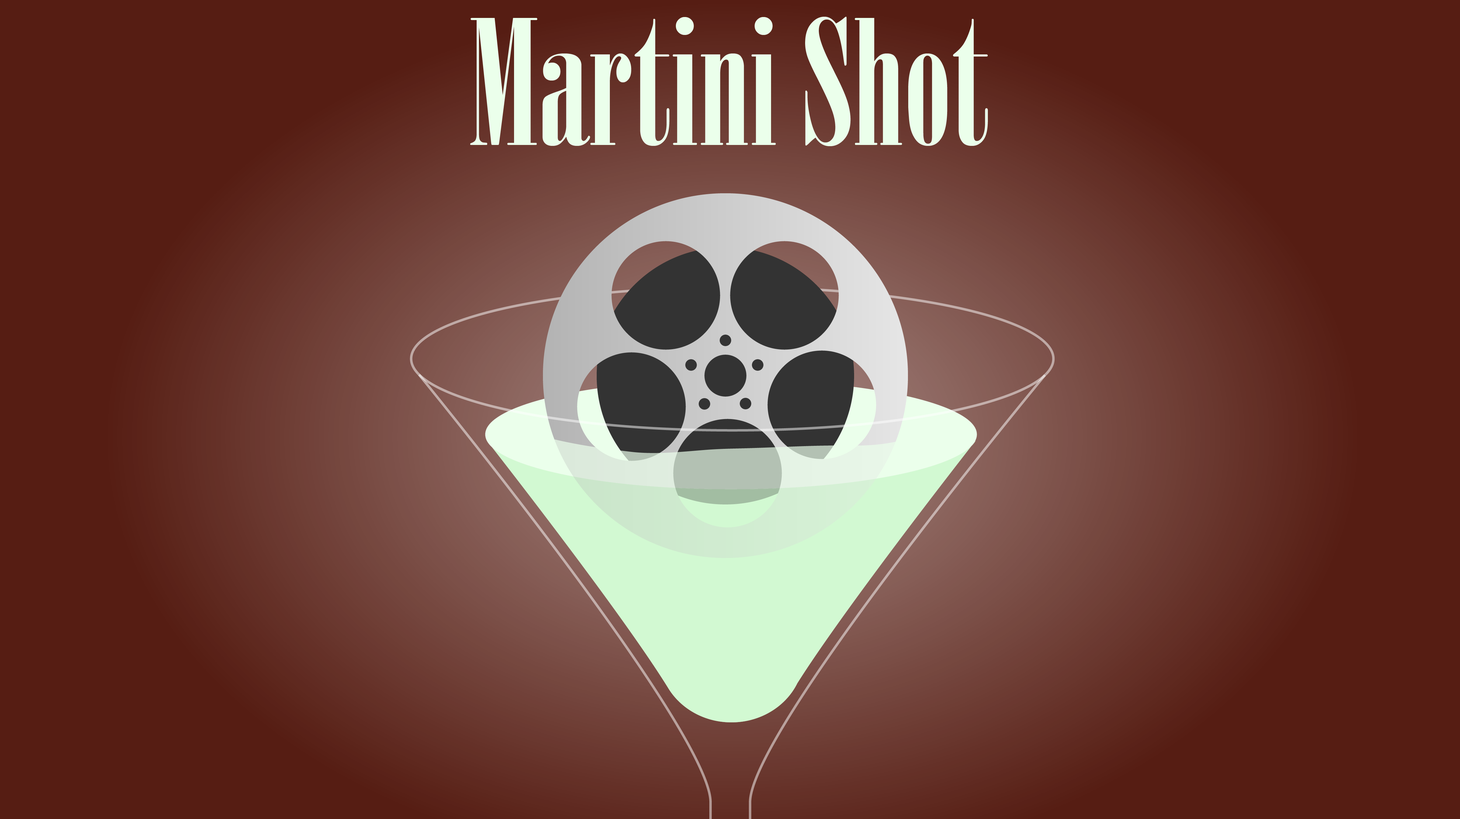 This is Rob Long with Martini Shot on KCRW and it's not 6:44 anymore, it's 4:44 now, which is called, in the television business, a time slot change...